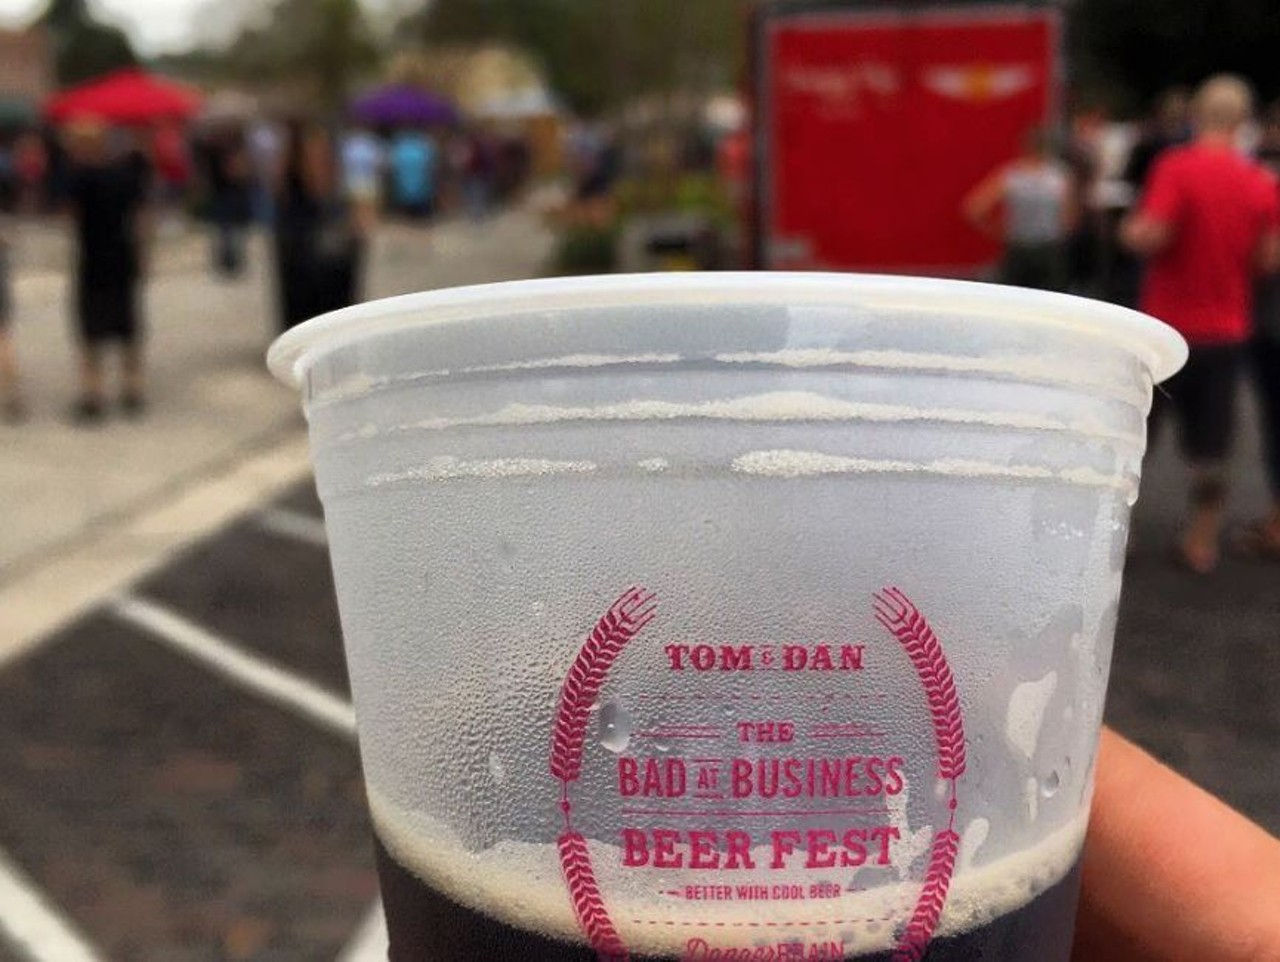 Saturday, Nov. 18 
Tom & Dan Bad at Business Beerfest
Beer festival from the local podcast featuring free admission, free beer samples and free live music.
12-6 pm; West End Trading Company, 202 S. Sanford Ave., Sanford; free; 407-322-7475
tomanddan.com
Photo via braaak_/Instagram